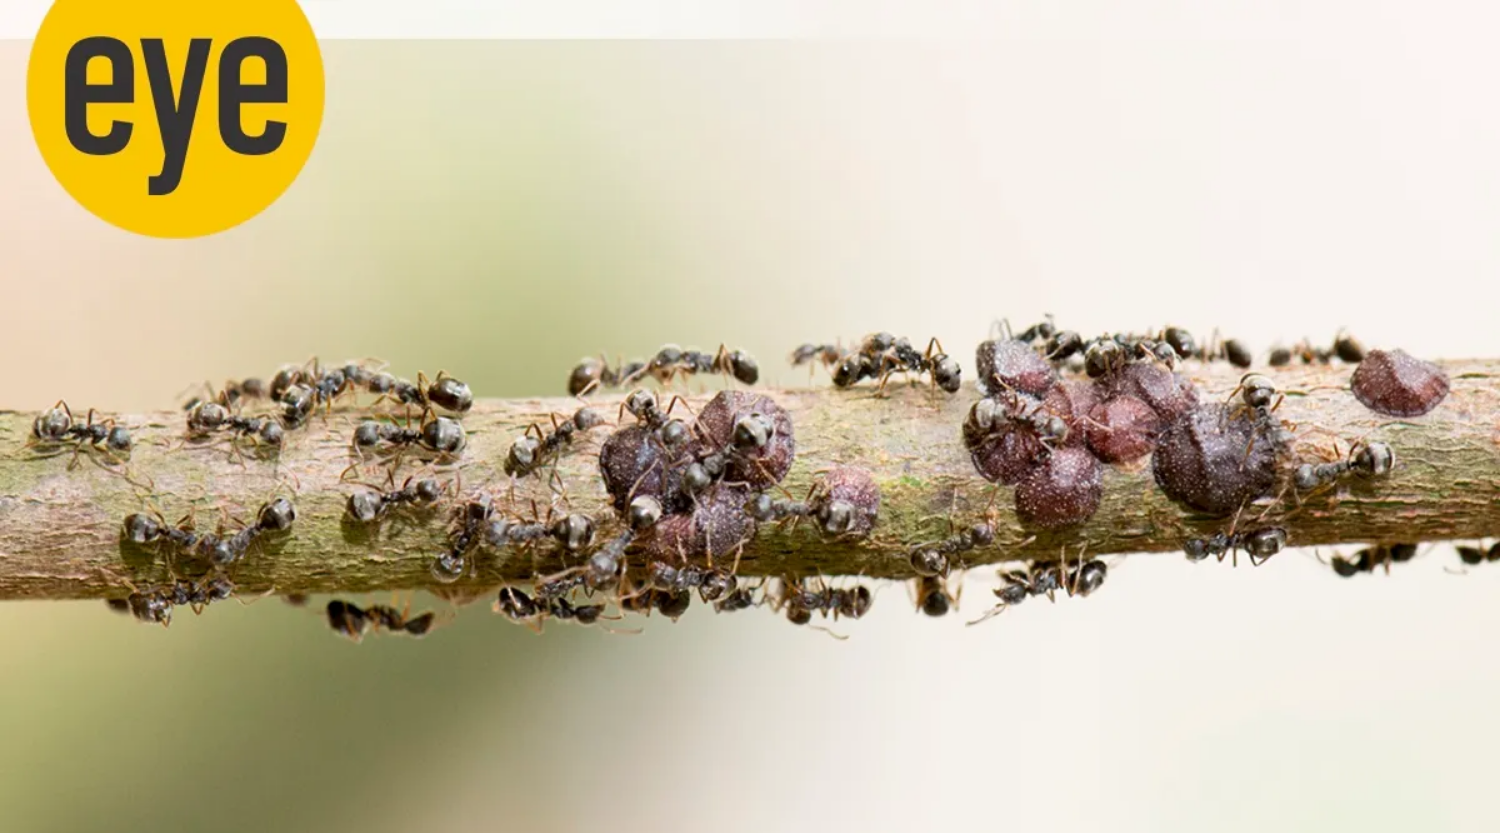 What makes ants the cliffhangers of insect kingdom